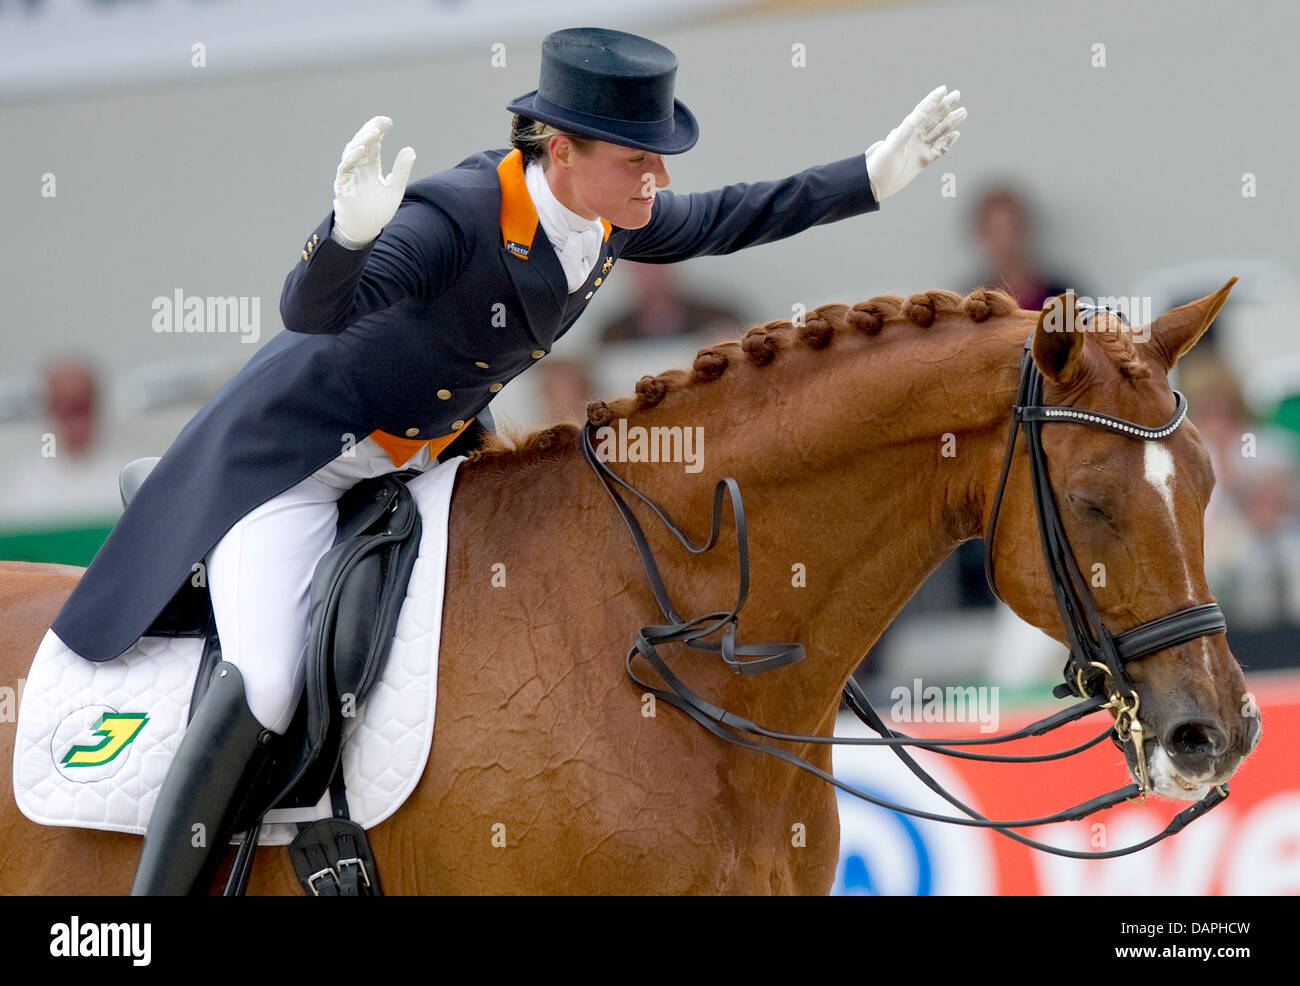 Dutch equestrian Adelinde Cornelissen praises her horse Jerich Parzival during the Grand Prix Special at the European Dressage Championship in Rotterdam, Netherlands, 20 August 2011. Cornelissen took first place. Photo: Uwe Anspach Stock Photo